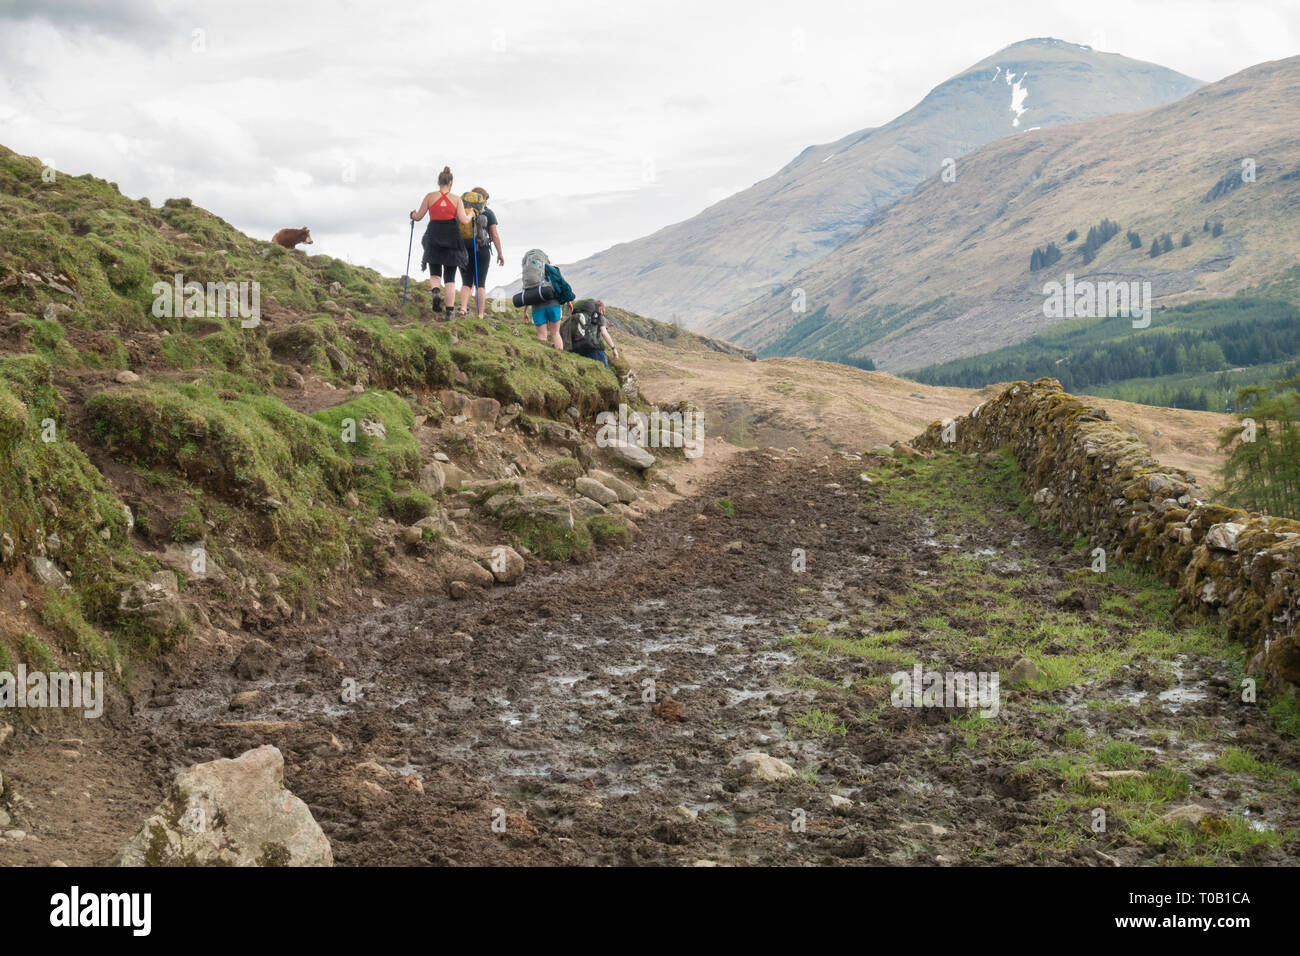 West Highland Way walkers avoiding mud and cow manure on section of footpath before Crianlarich known as cow pat alley in 2018 - reparwork  has since Stock Photo